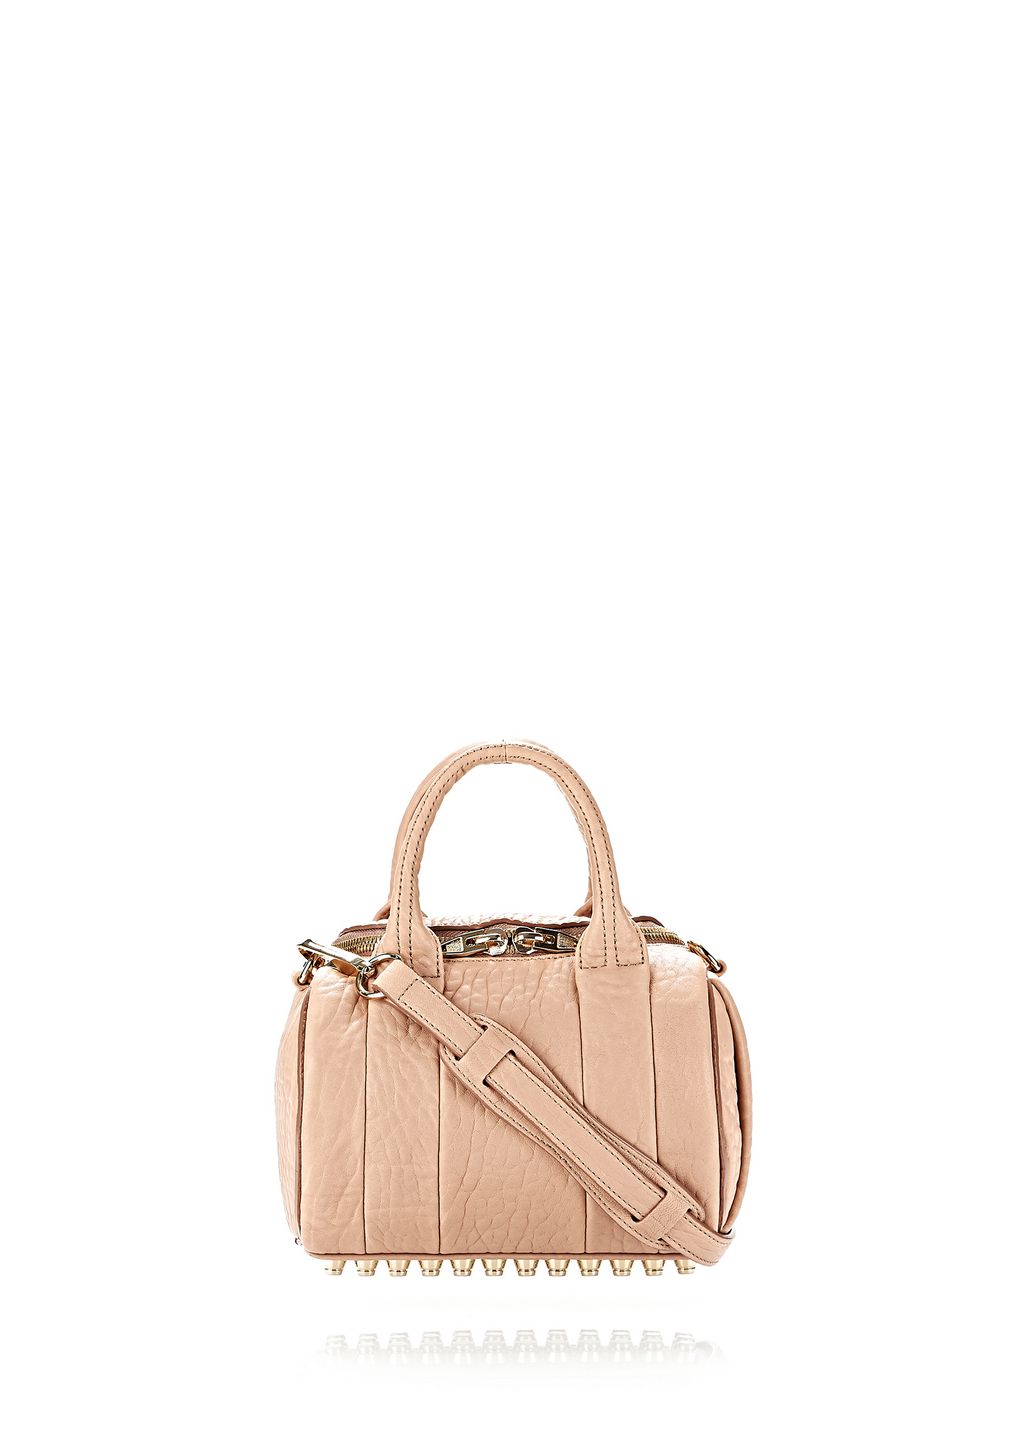 Alexander Wang ‎MINI ROCKIE IN PEBBLED BLUSH WITH PALE GOLD ‎ ‎Shoulder ...